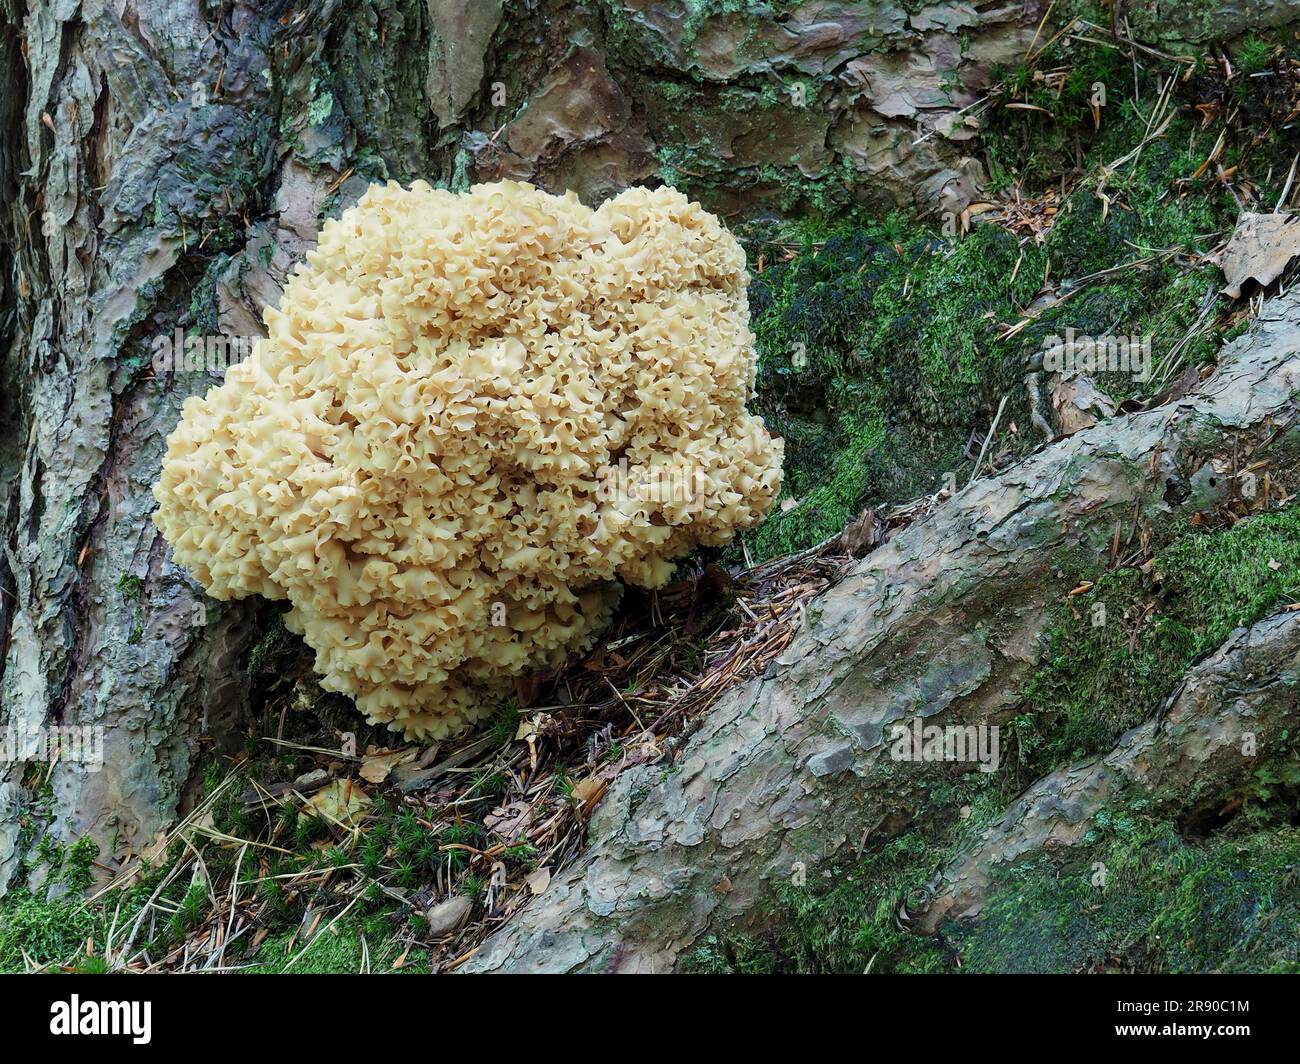 Cauliflower mushroom is a genus of parasitic and saprobic mushrooms characterised by their unique shape and appearance. This appearance can be Stock Photo